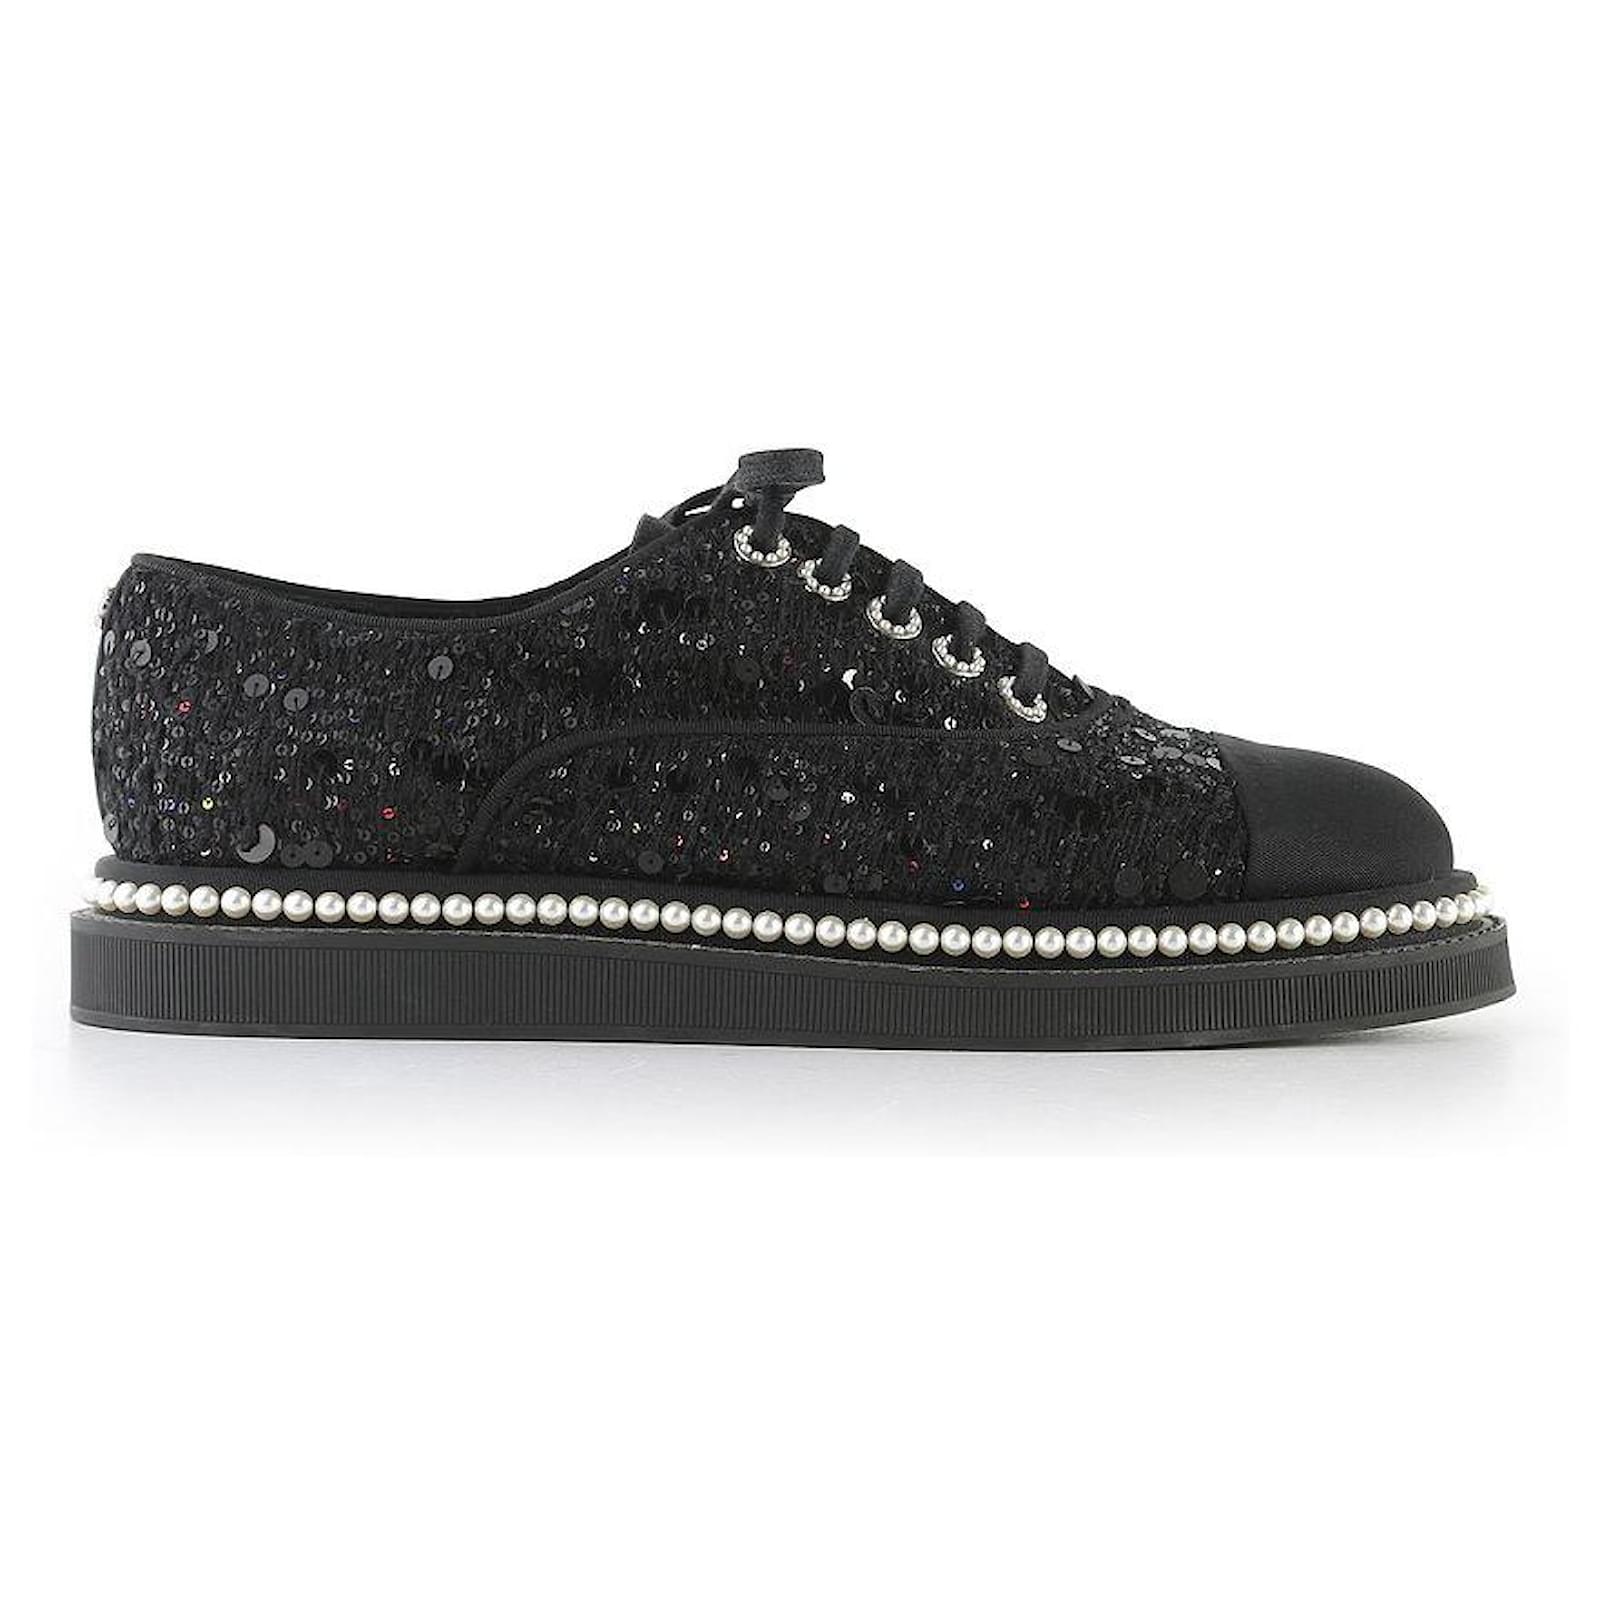 Chanel Sneakers Black White Tweed Crystal Pearl Trim Lace Up